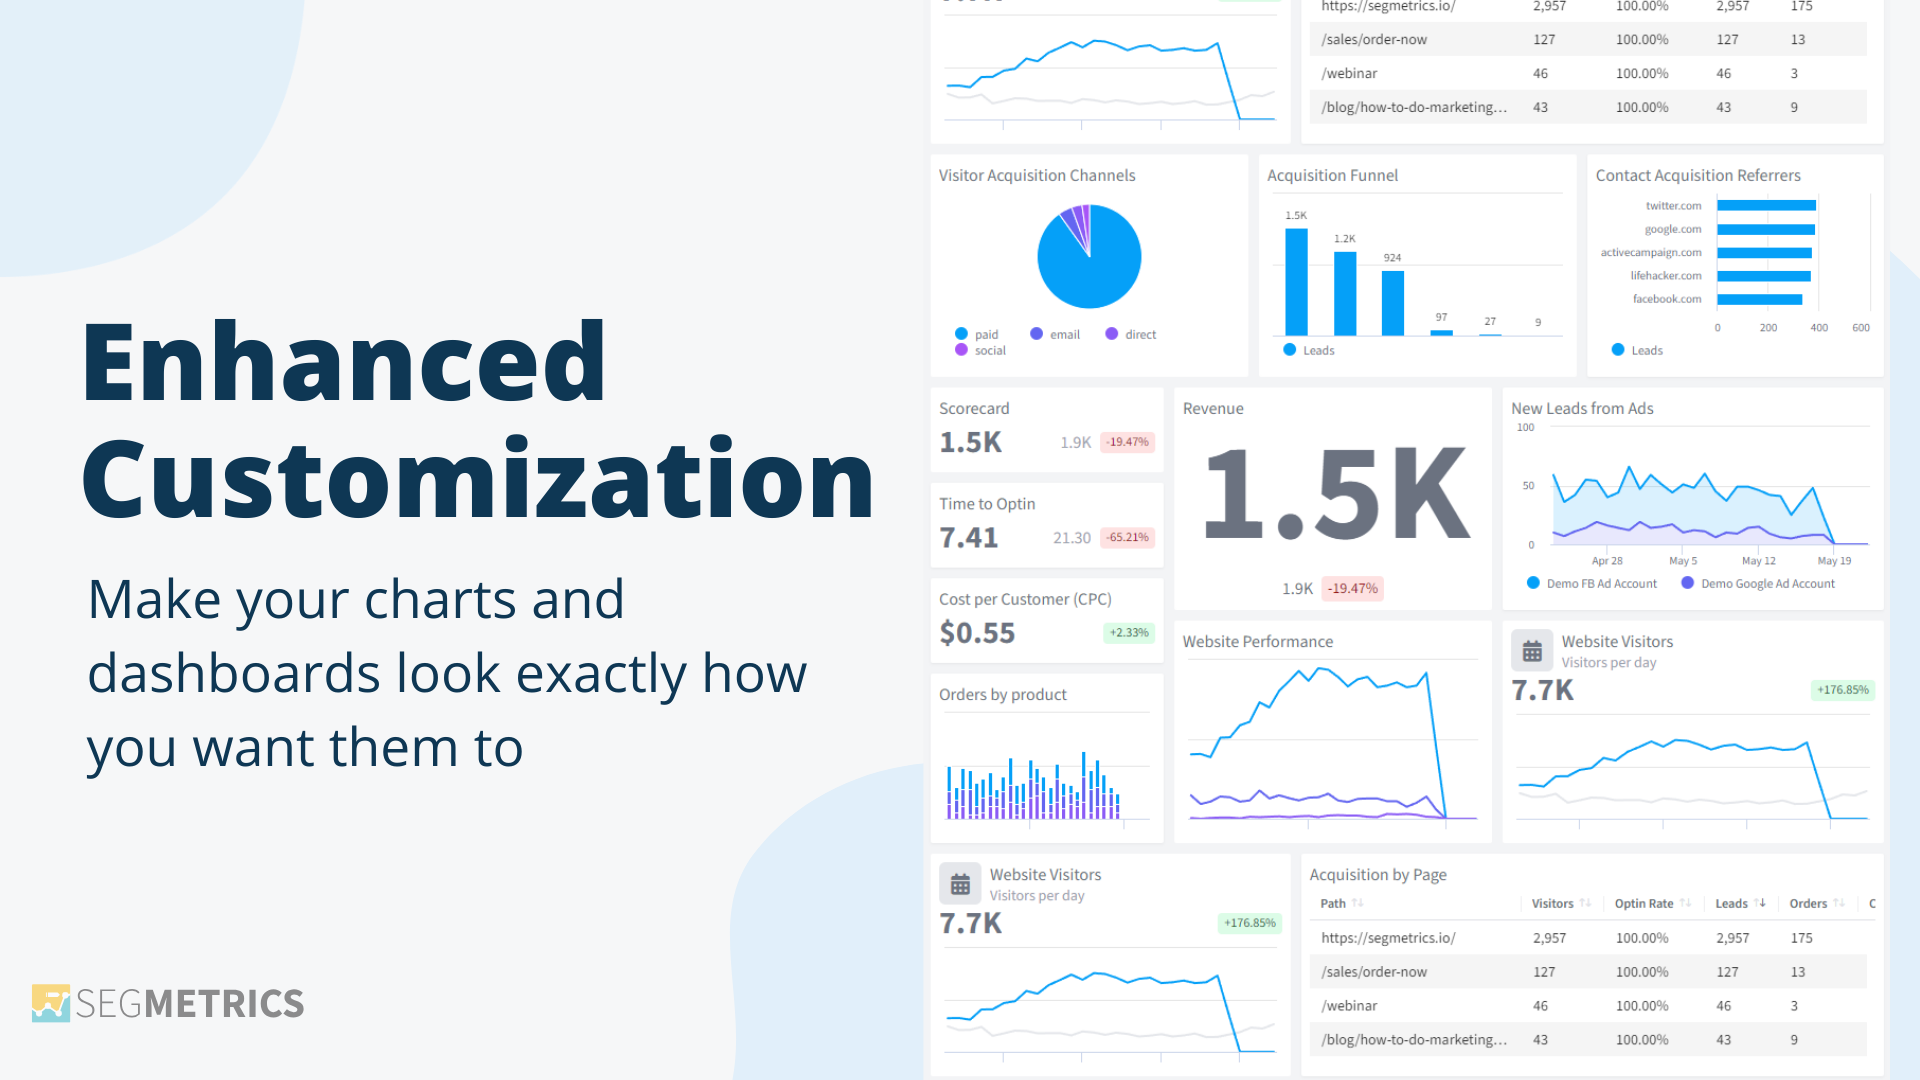 Enhanced Customization - Make your charts and dashboards look exactly how you want them to